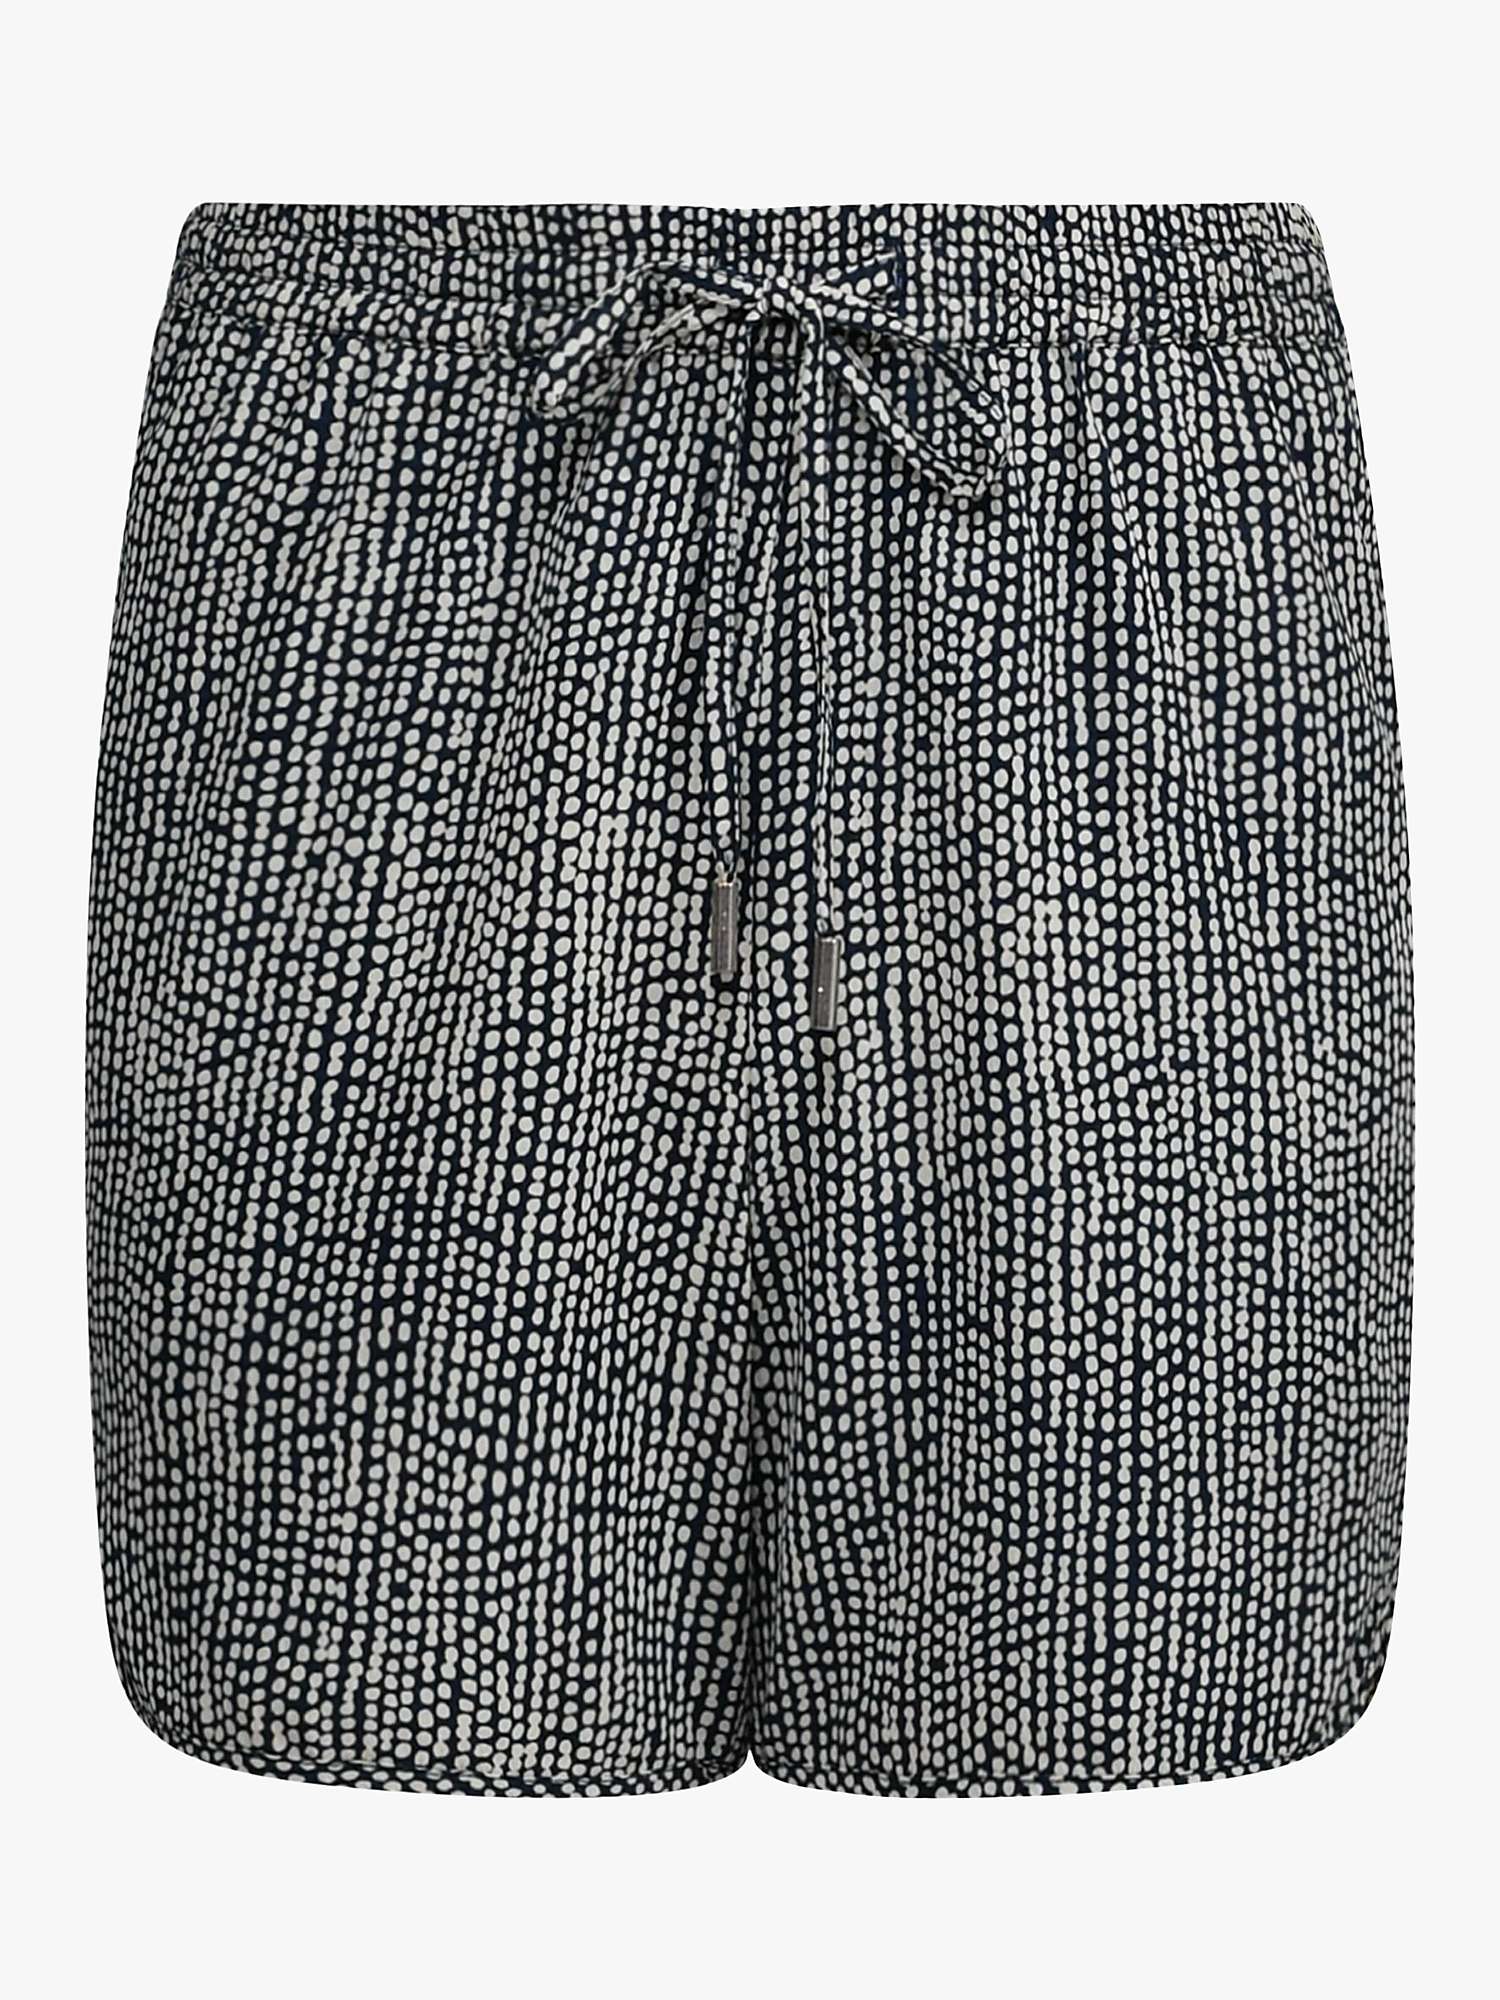 Buy Sisters Point Ella Dot Print Loose Fitted Shorts, Navy/White Online at johnlewis.com